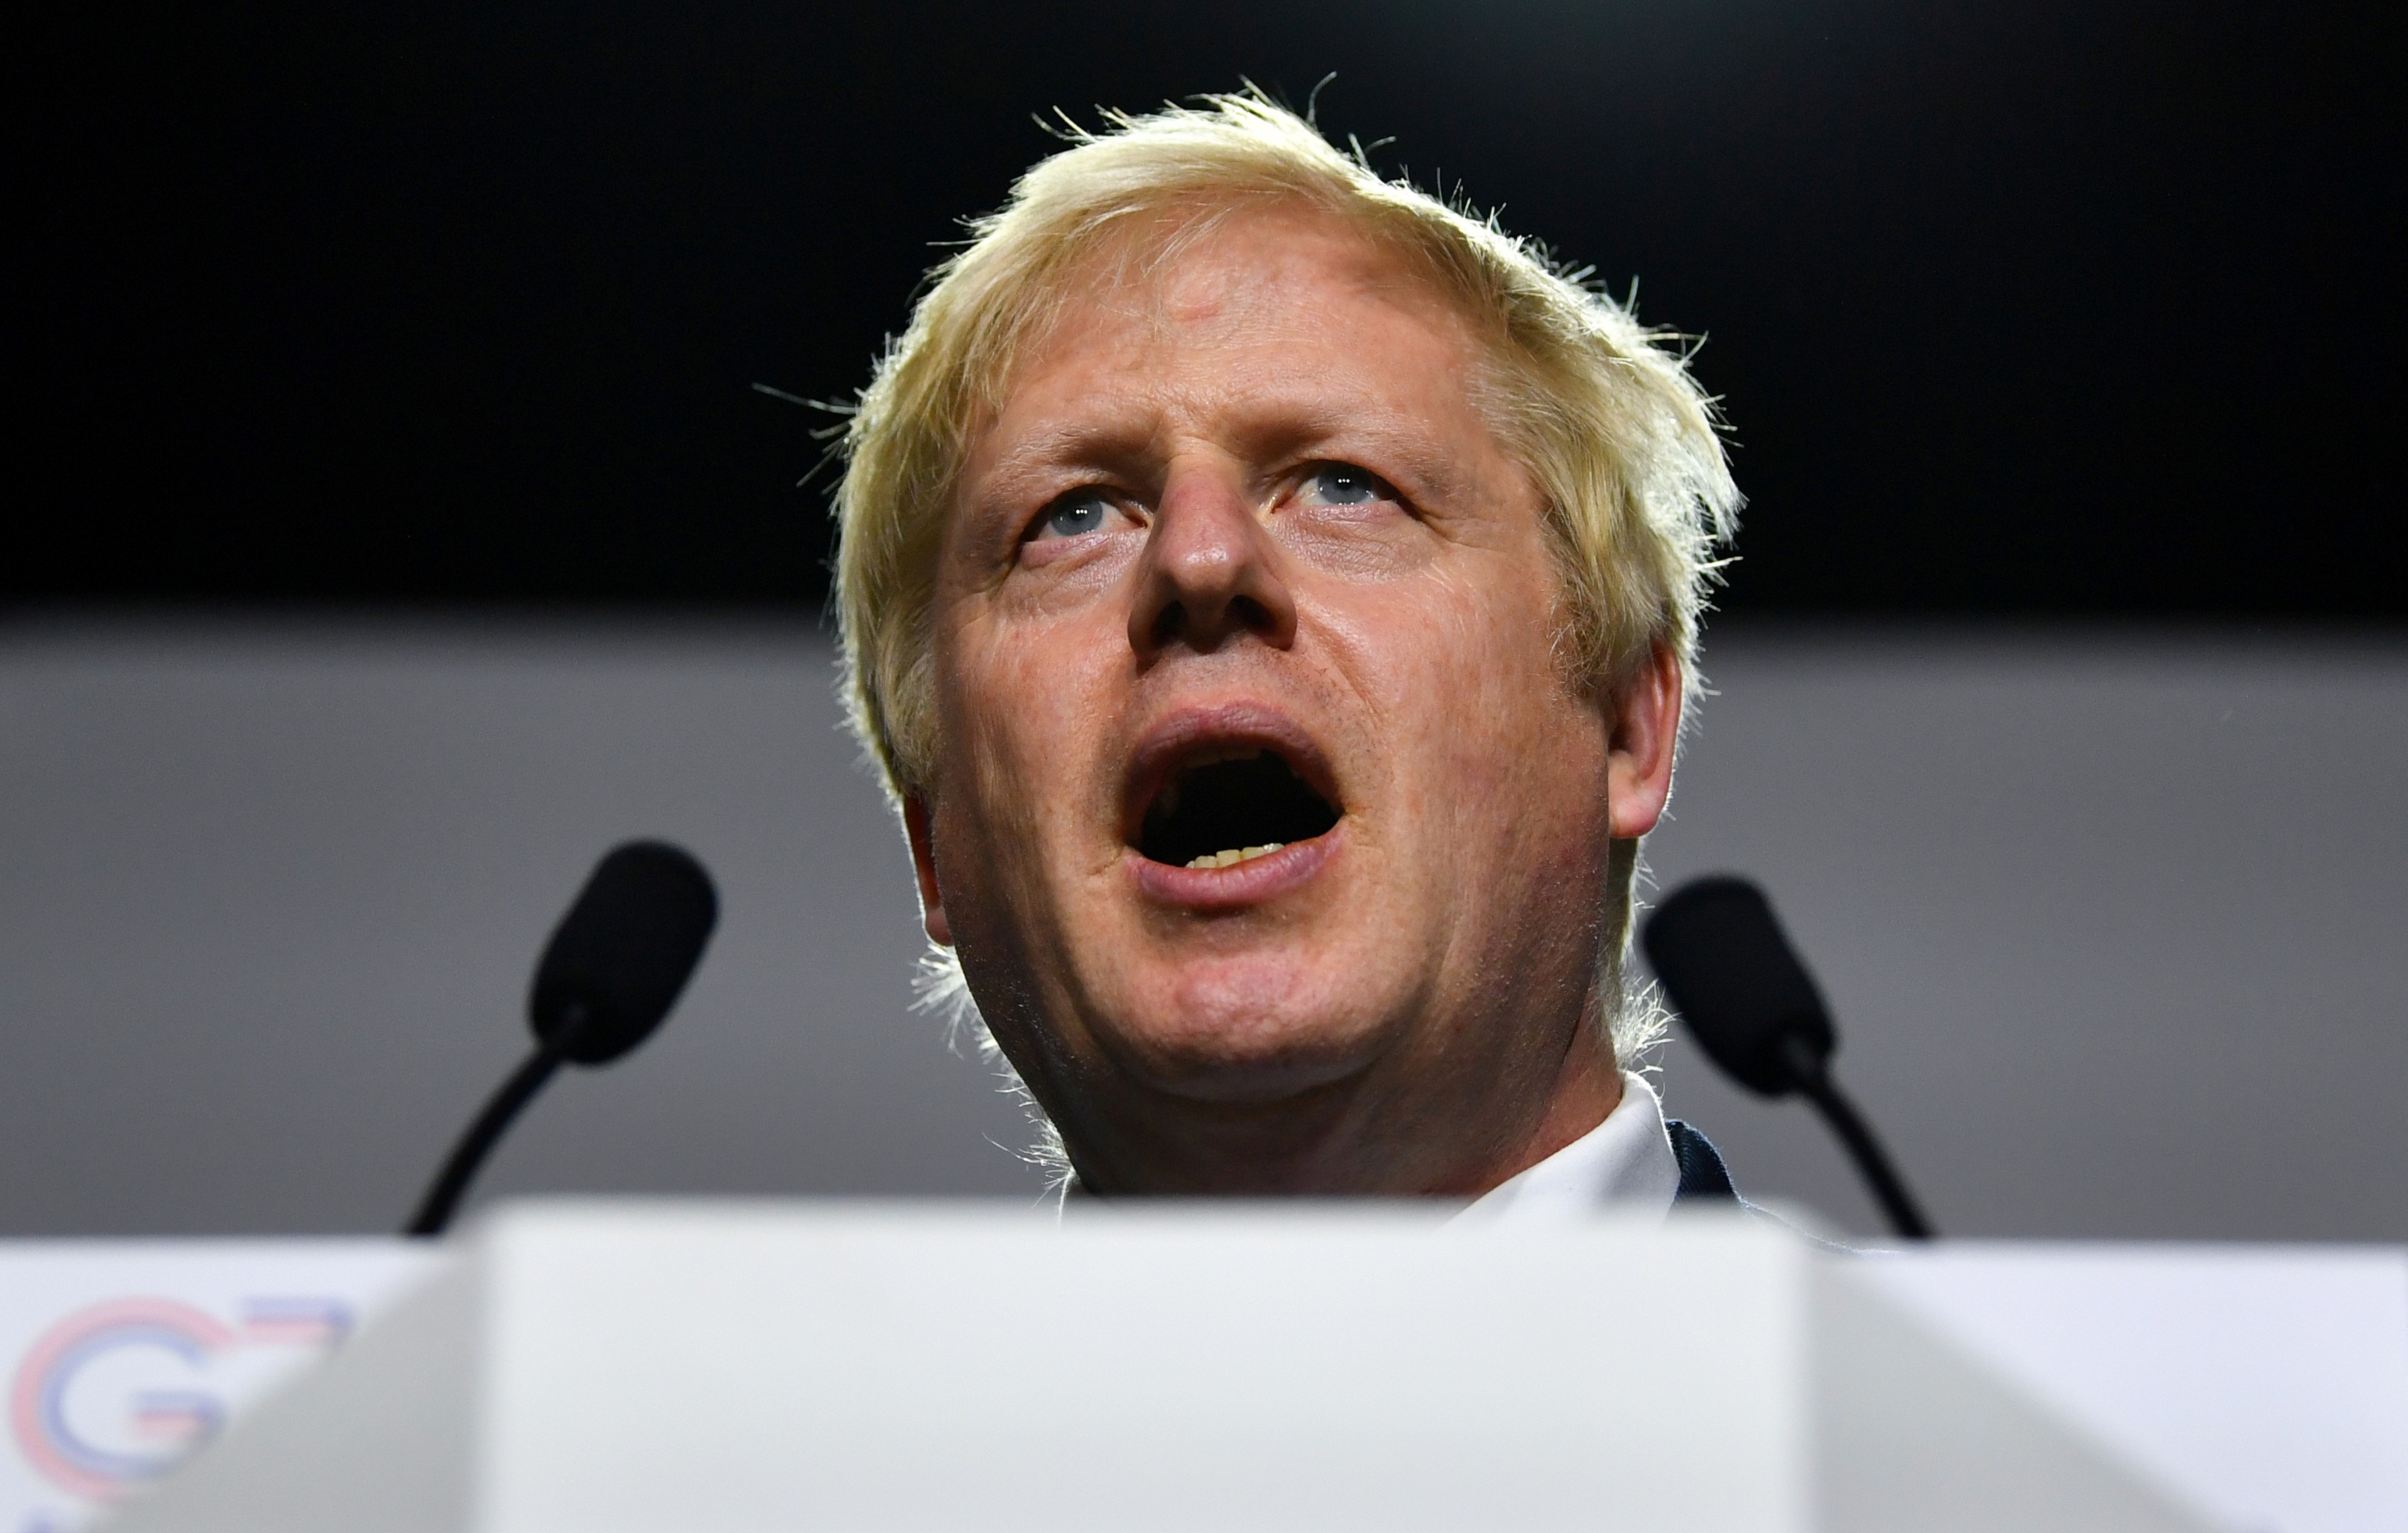 Britain's Prime Minister Boris Johnson speaks during a news conference at the end of the G7 summit in Biarritz. Photo: Reuters